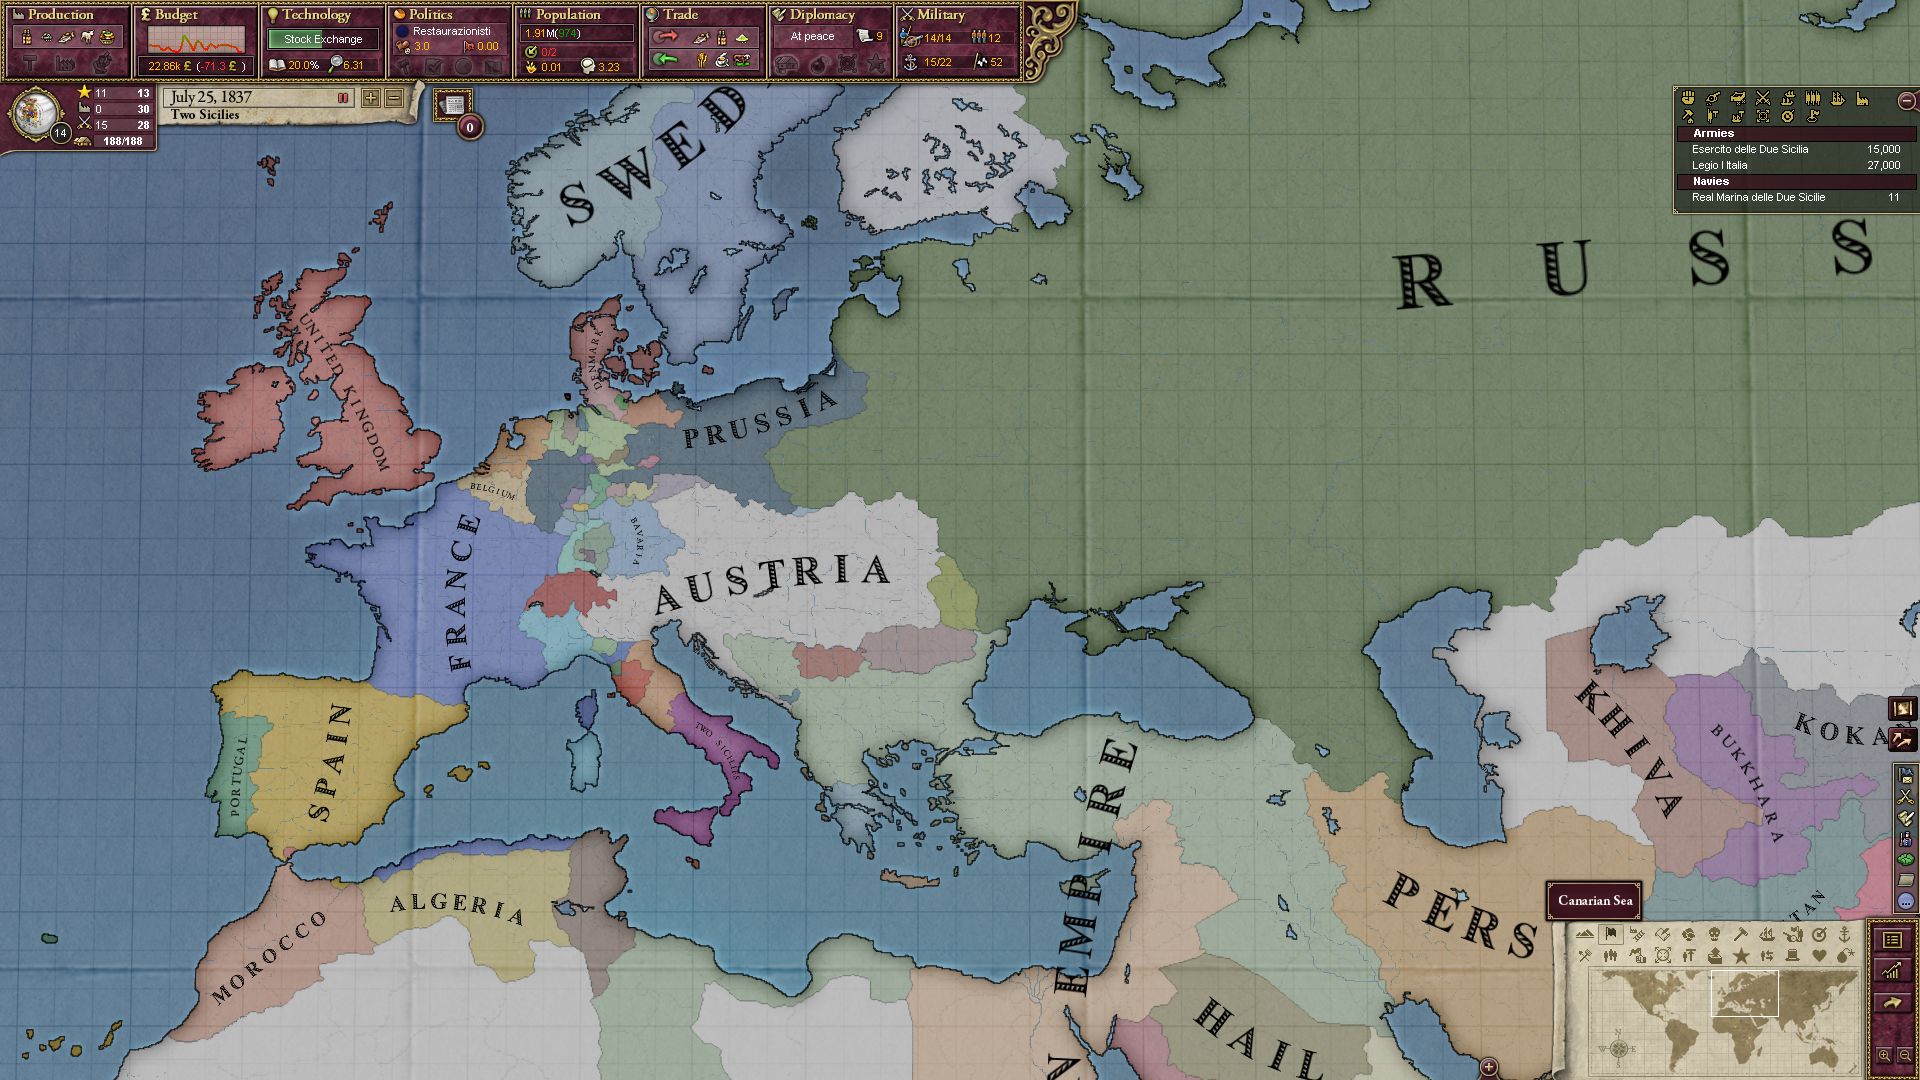 Victoria 3 confirmed with PDXCon 2021 announcement - Polygon